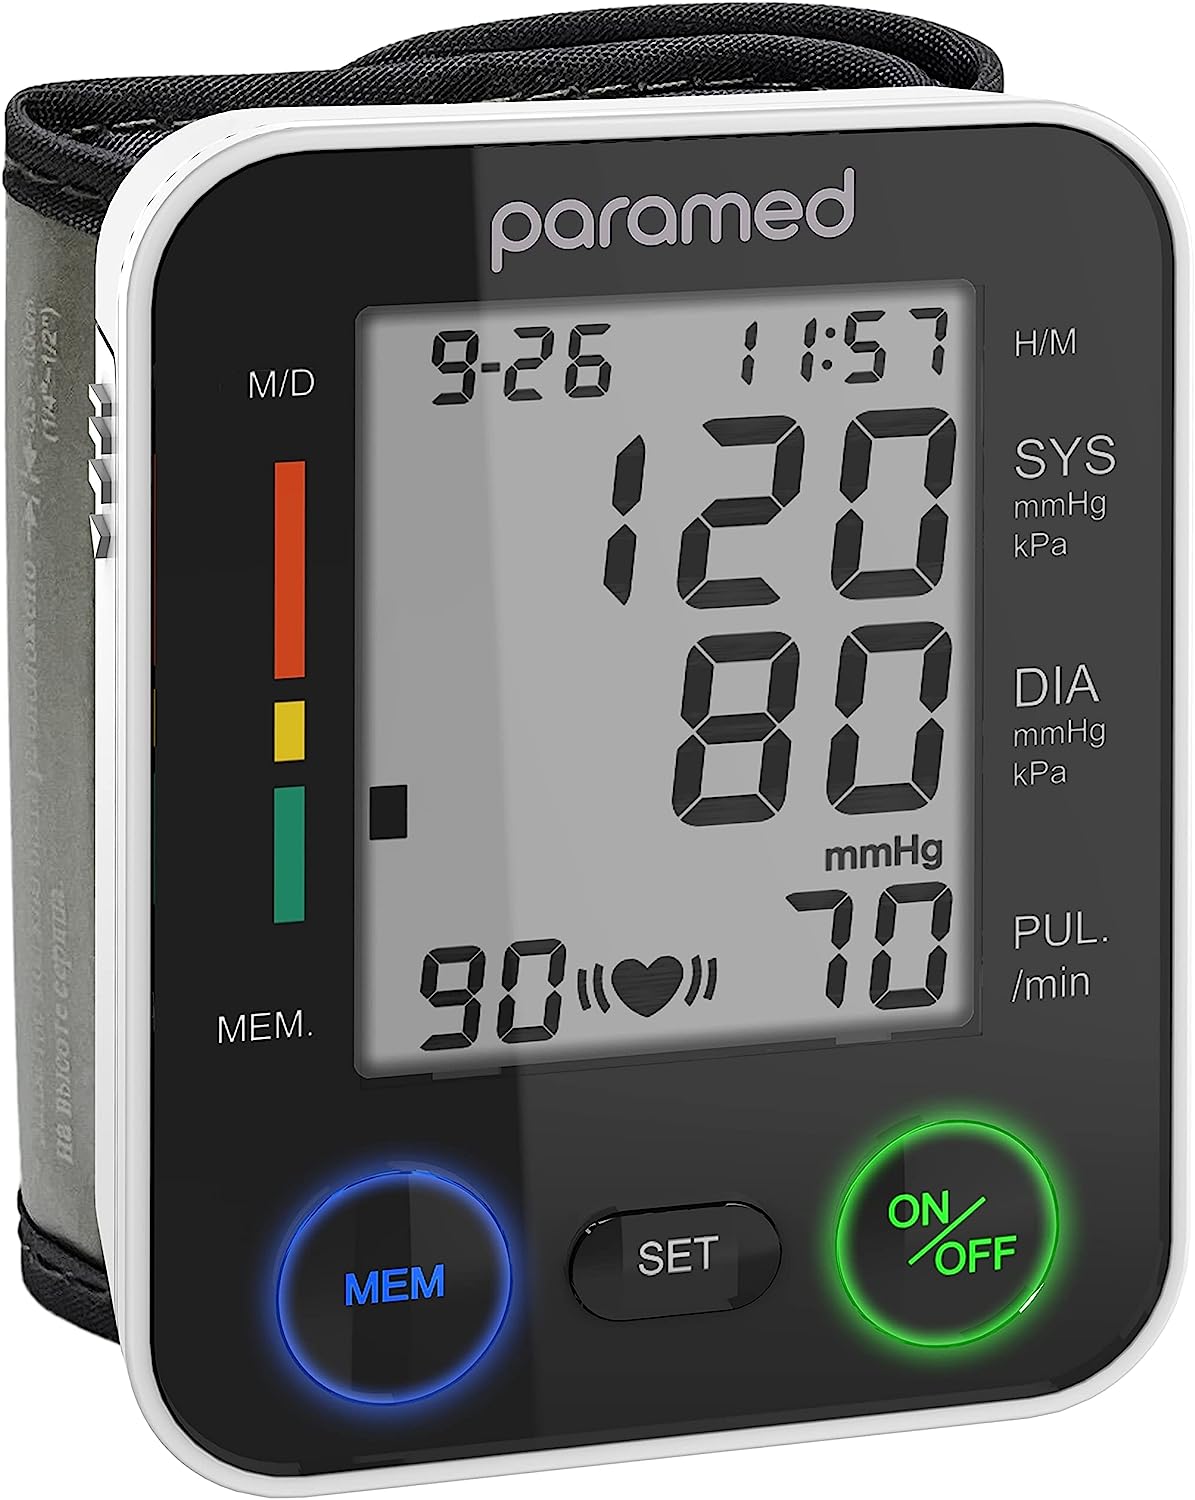 PARAMED Automatic Wrist Blood Pressure Monitor: Blood- [...]